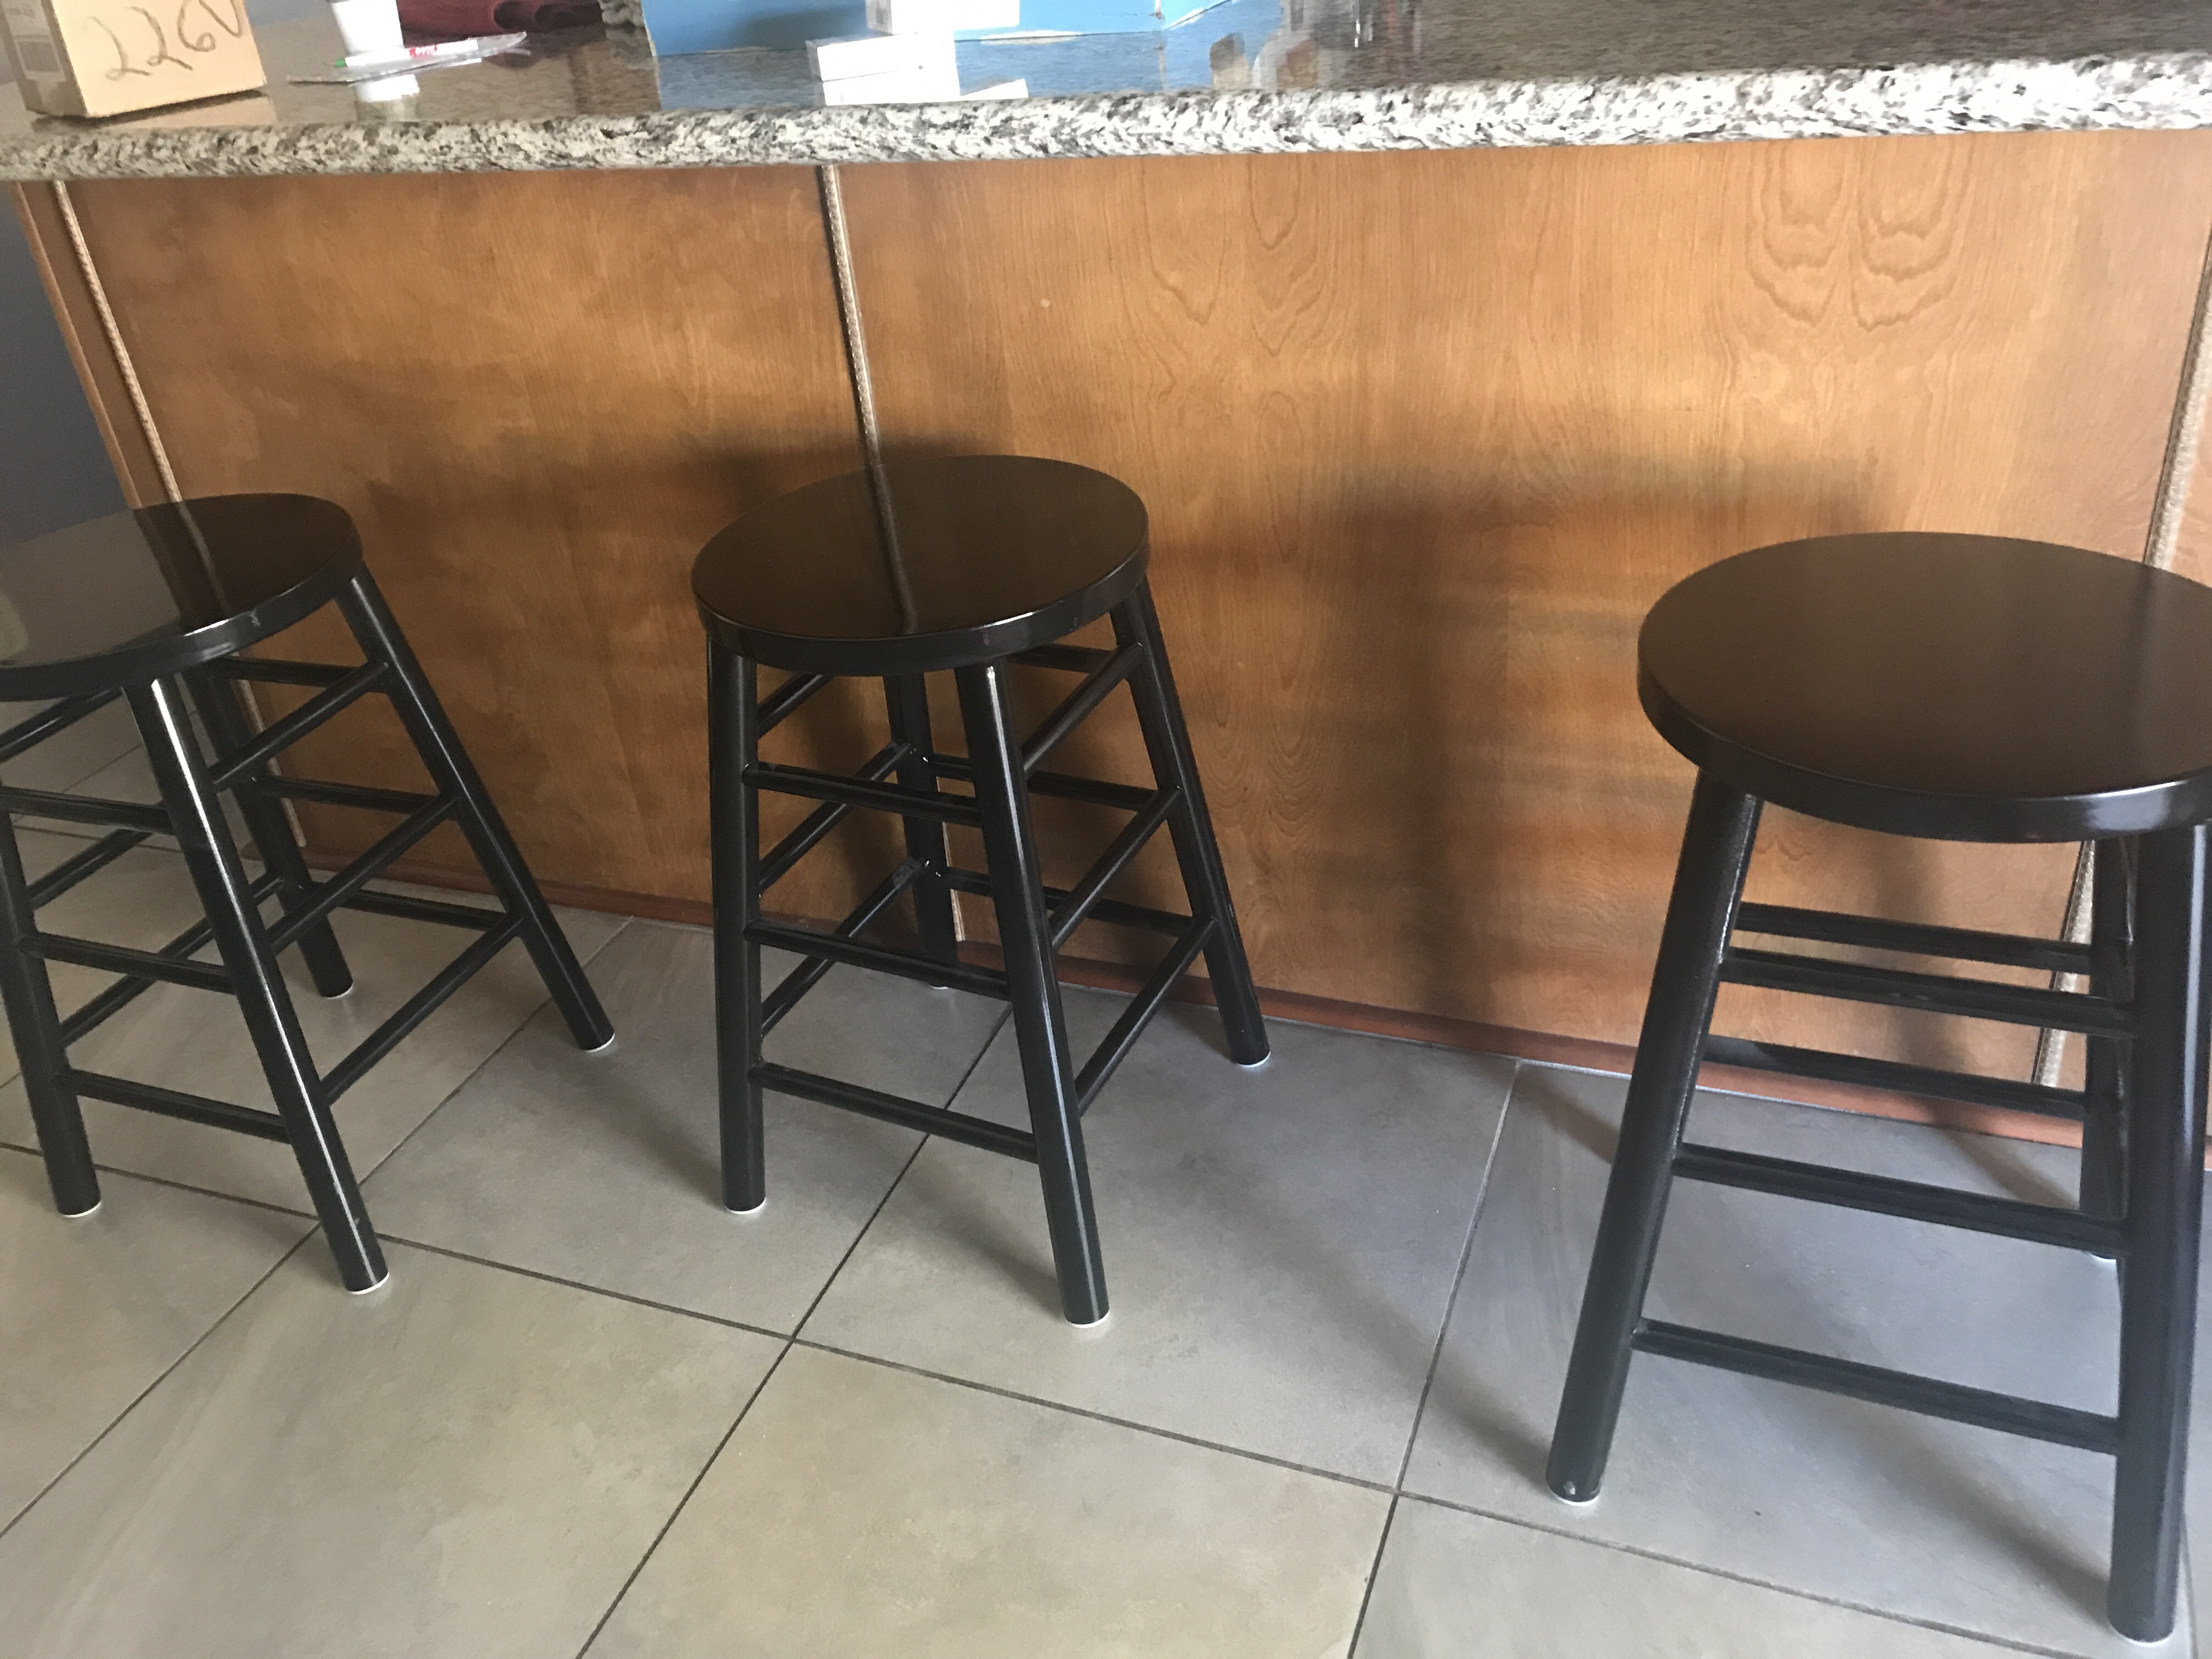 We are so in love with these bar stools! 